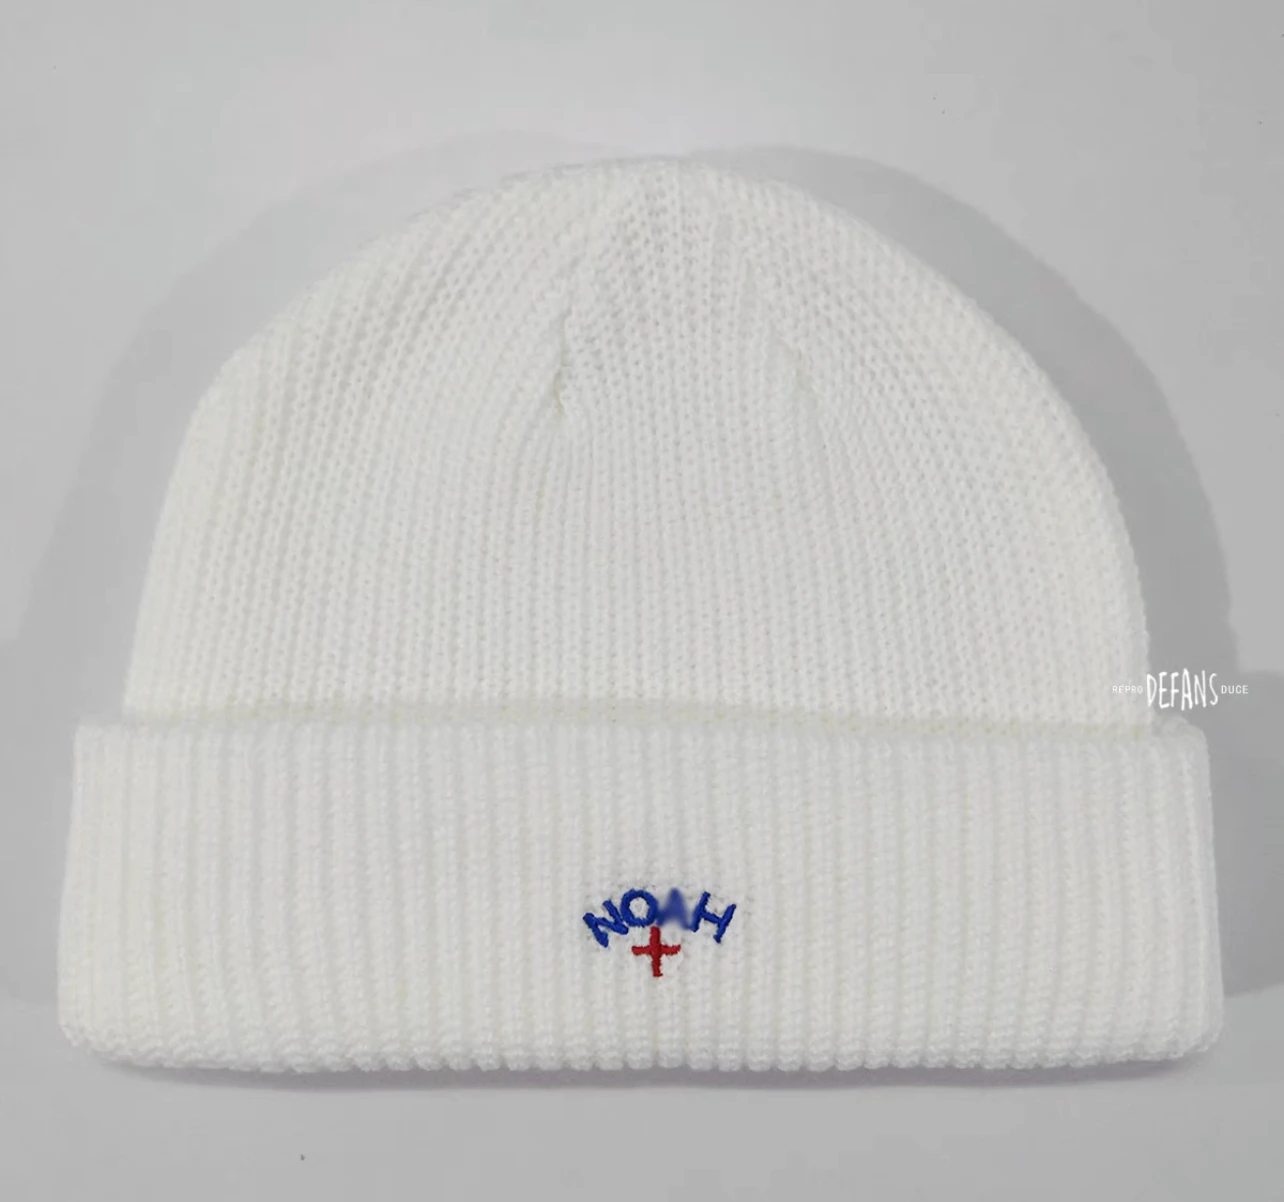 DEFANS NOAH CORE LOGO BEANIE Striped Wool Hat Male Cross Embroidery Knitted  Cold Hat Female